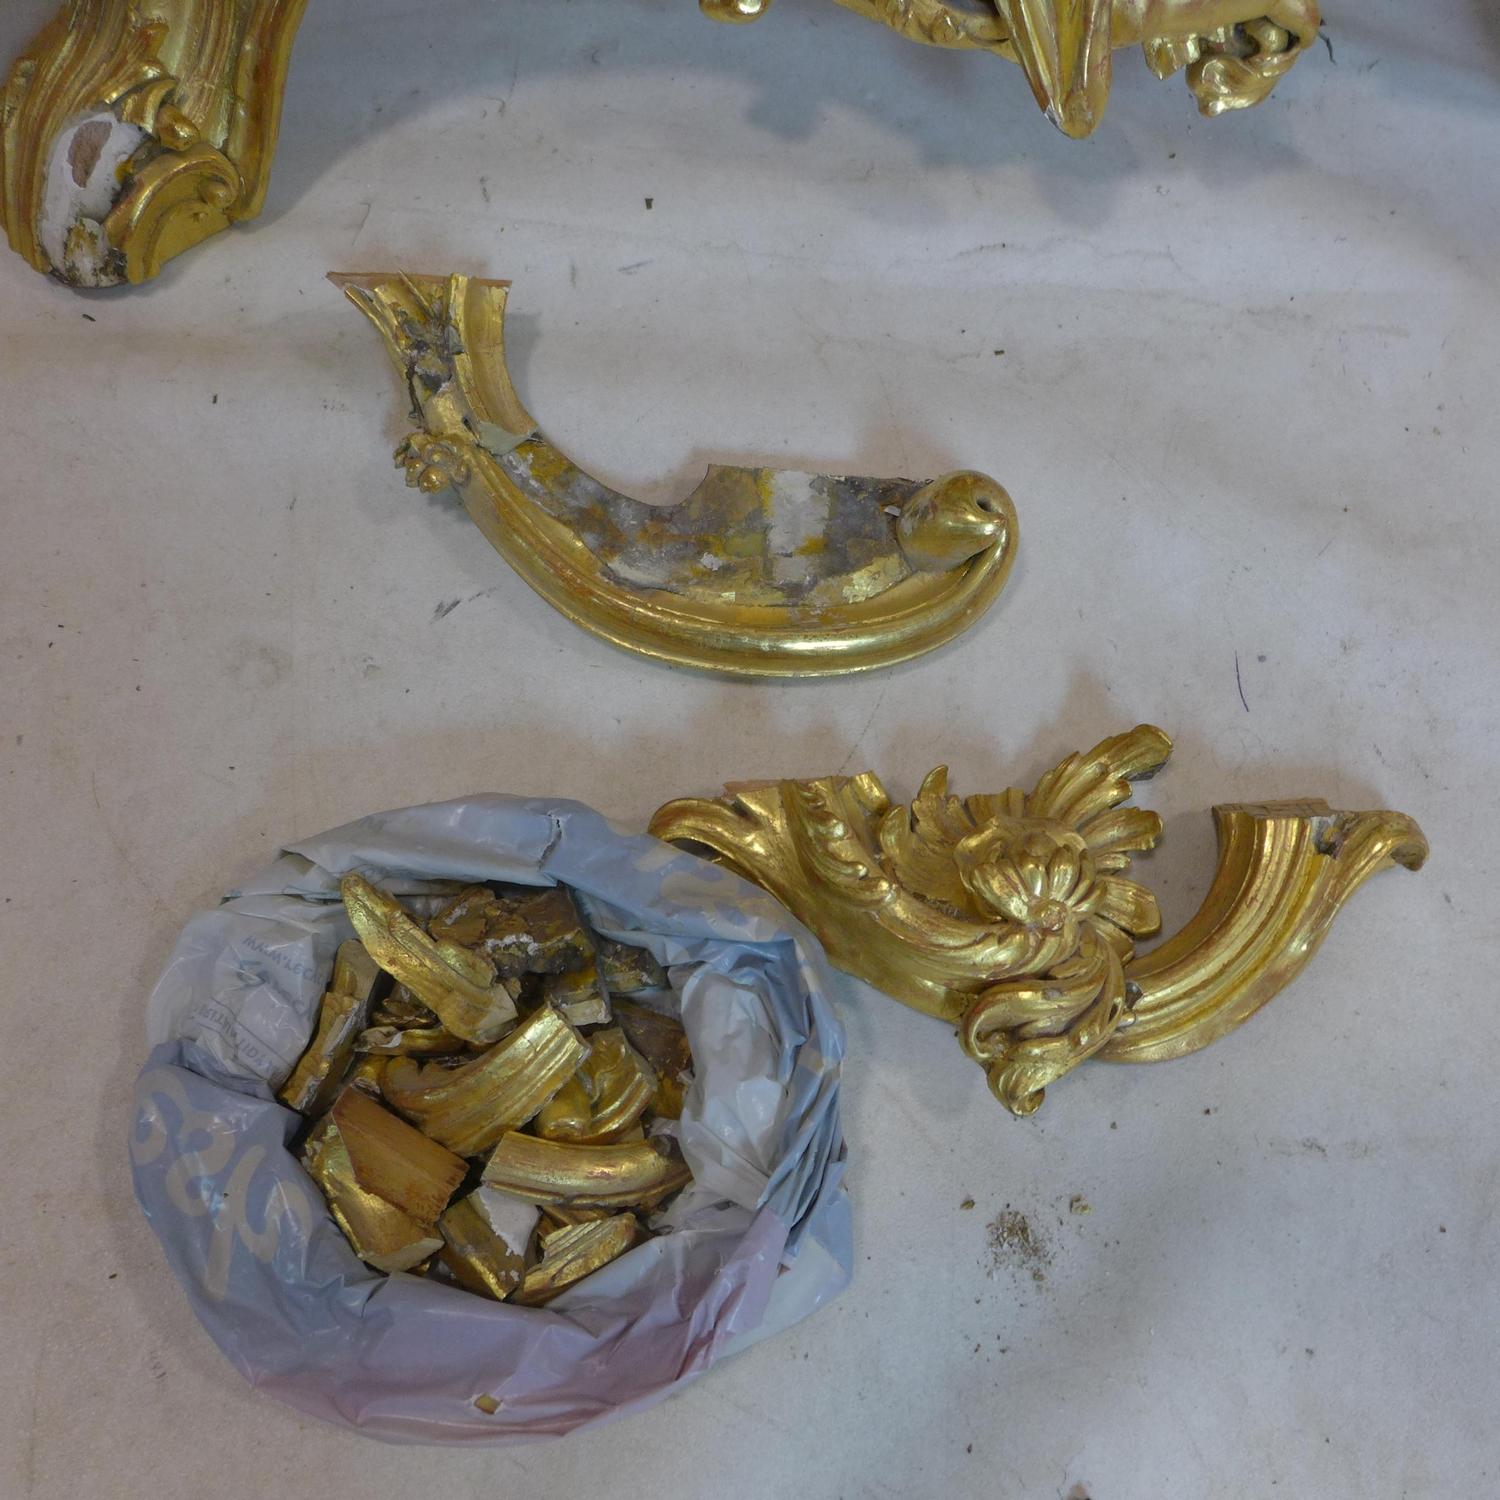 A 19th century Rococo gilt wood and gesso console table, some pieces need re attaching, lacking - Image 3 of 3